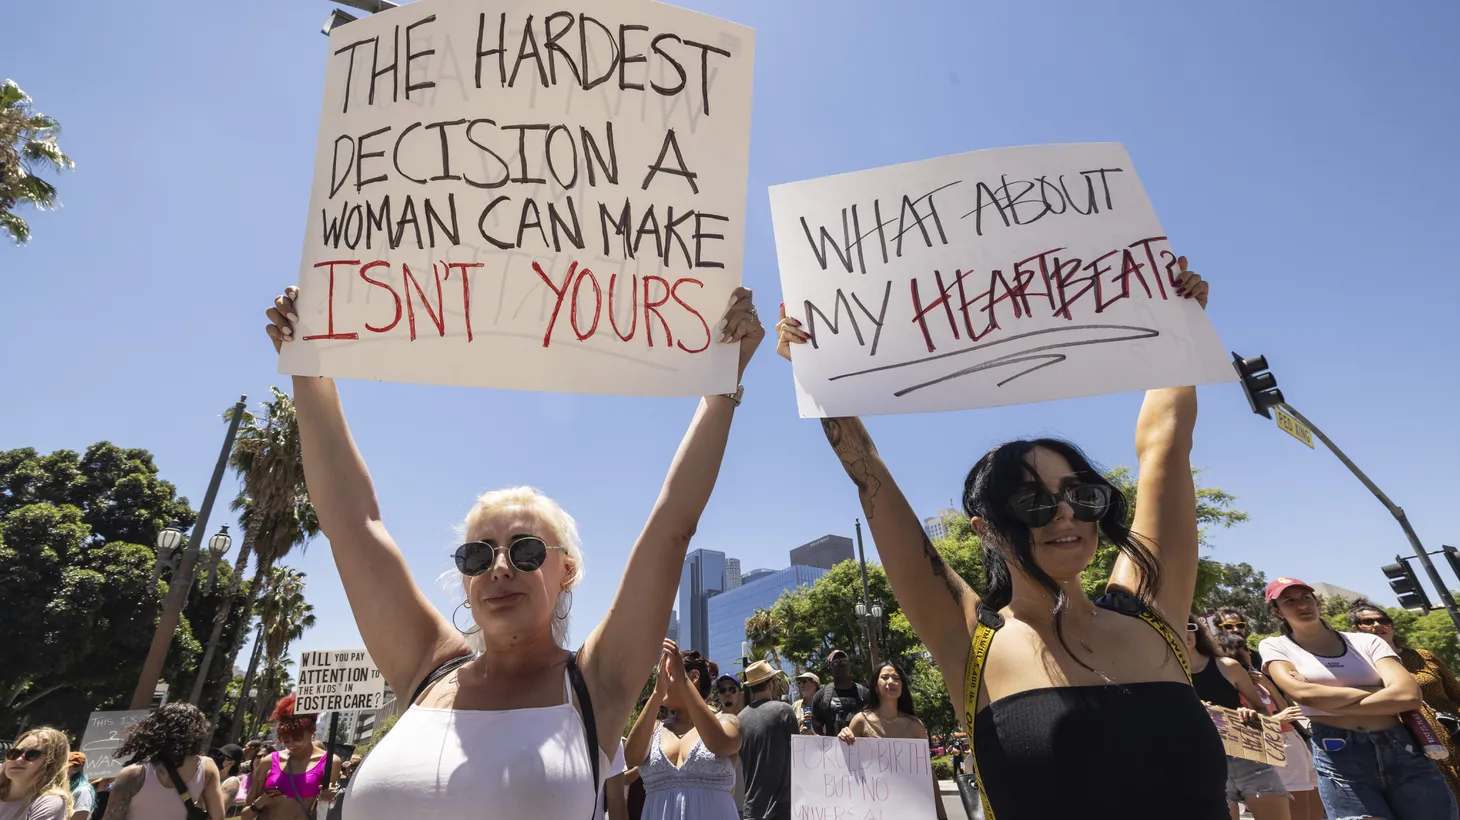 Activists in Los Angeles hold signs that say, “The hardest decision a woman can make isn’t yours” and “What about my heartbeat?” Photo taken June 25, 2022.